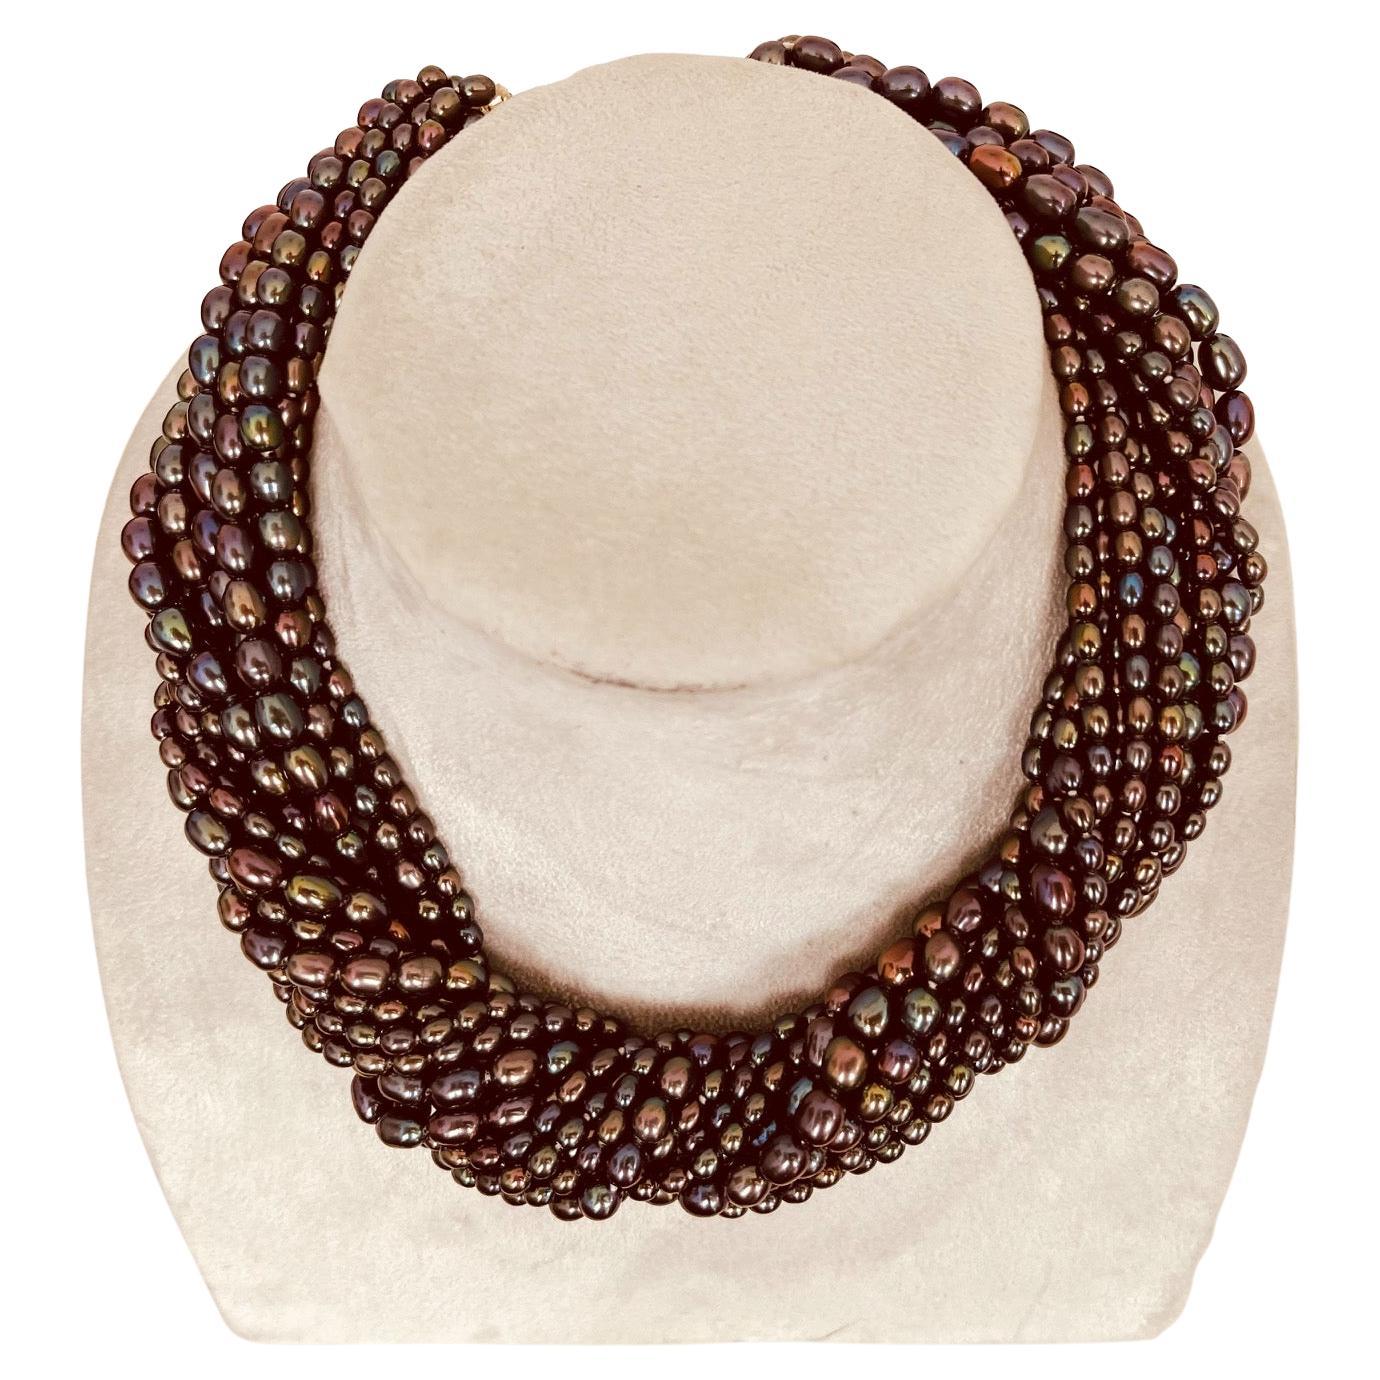 A multi row dyed black cultured pearl necklace of varying oval sizes beads connected to a pair of 18ct gold fasteners. Circa 1990. Maximum length 41cm. 17 rows beads varying from 3mm to 5mm. Diameter of rows 17mm. Pearls' origin is China and clasp's